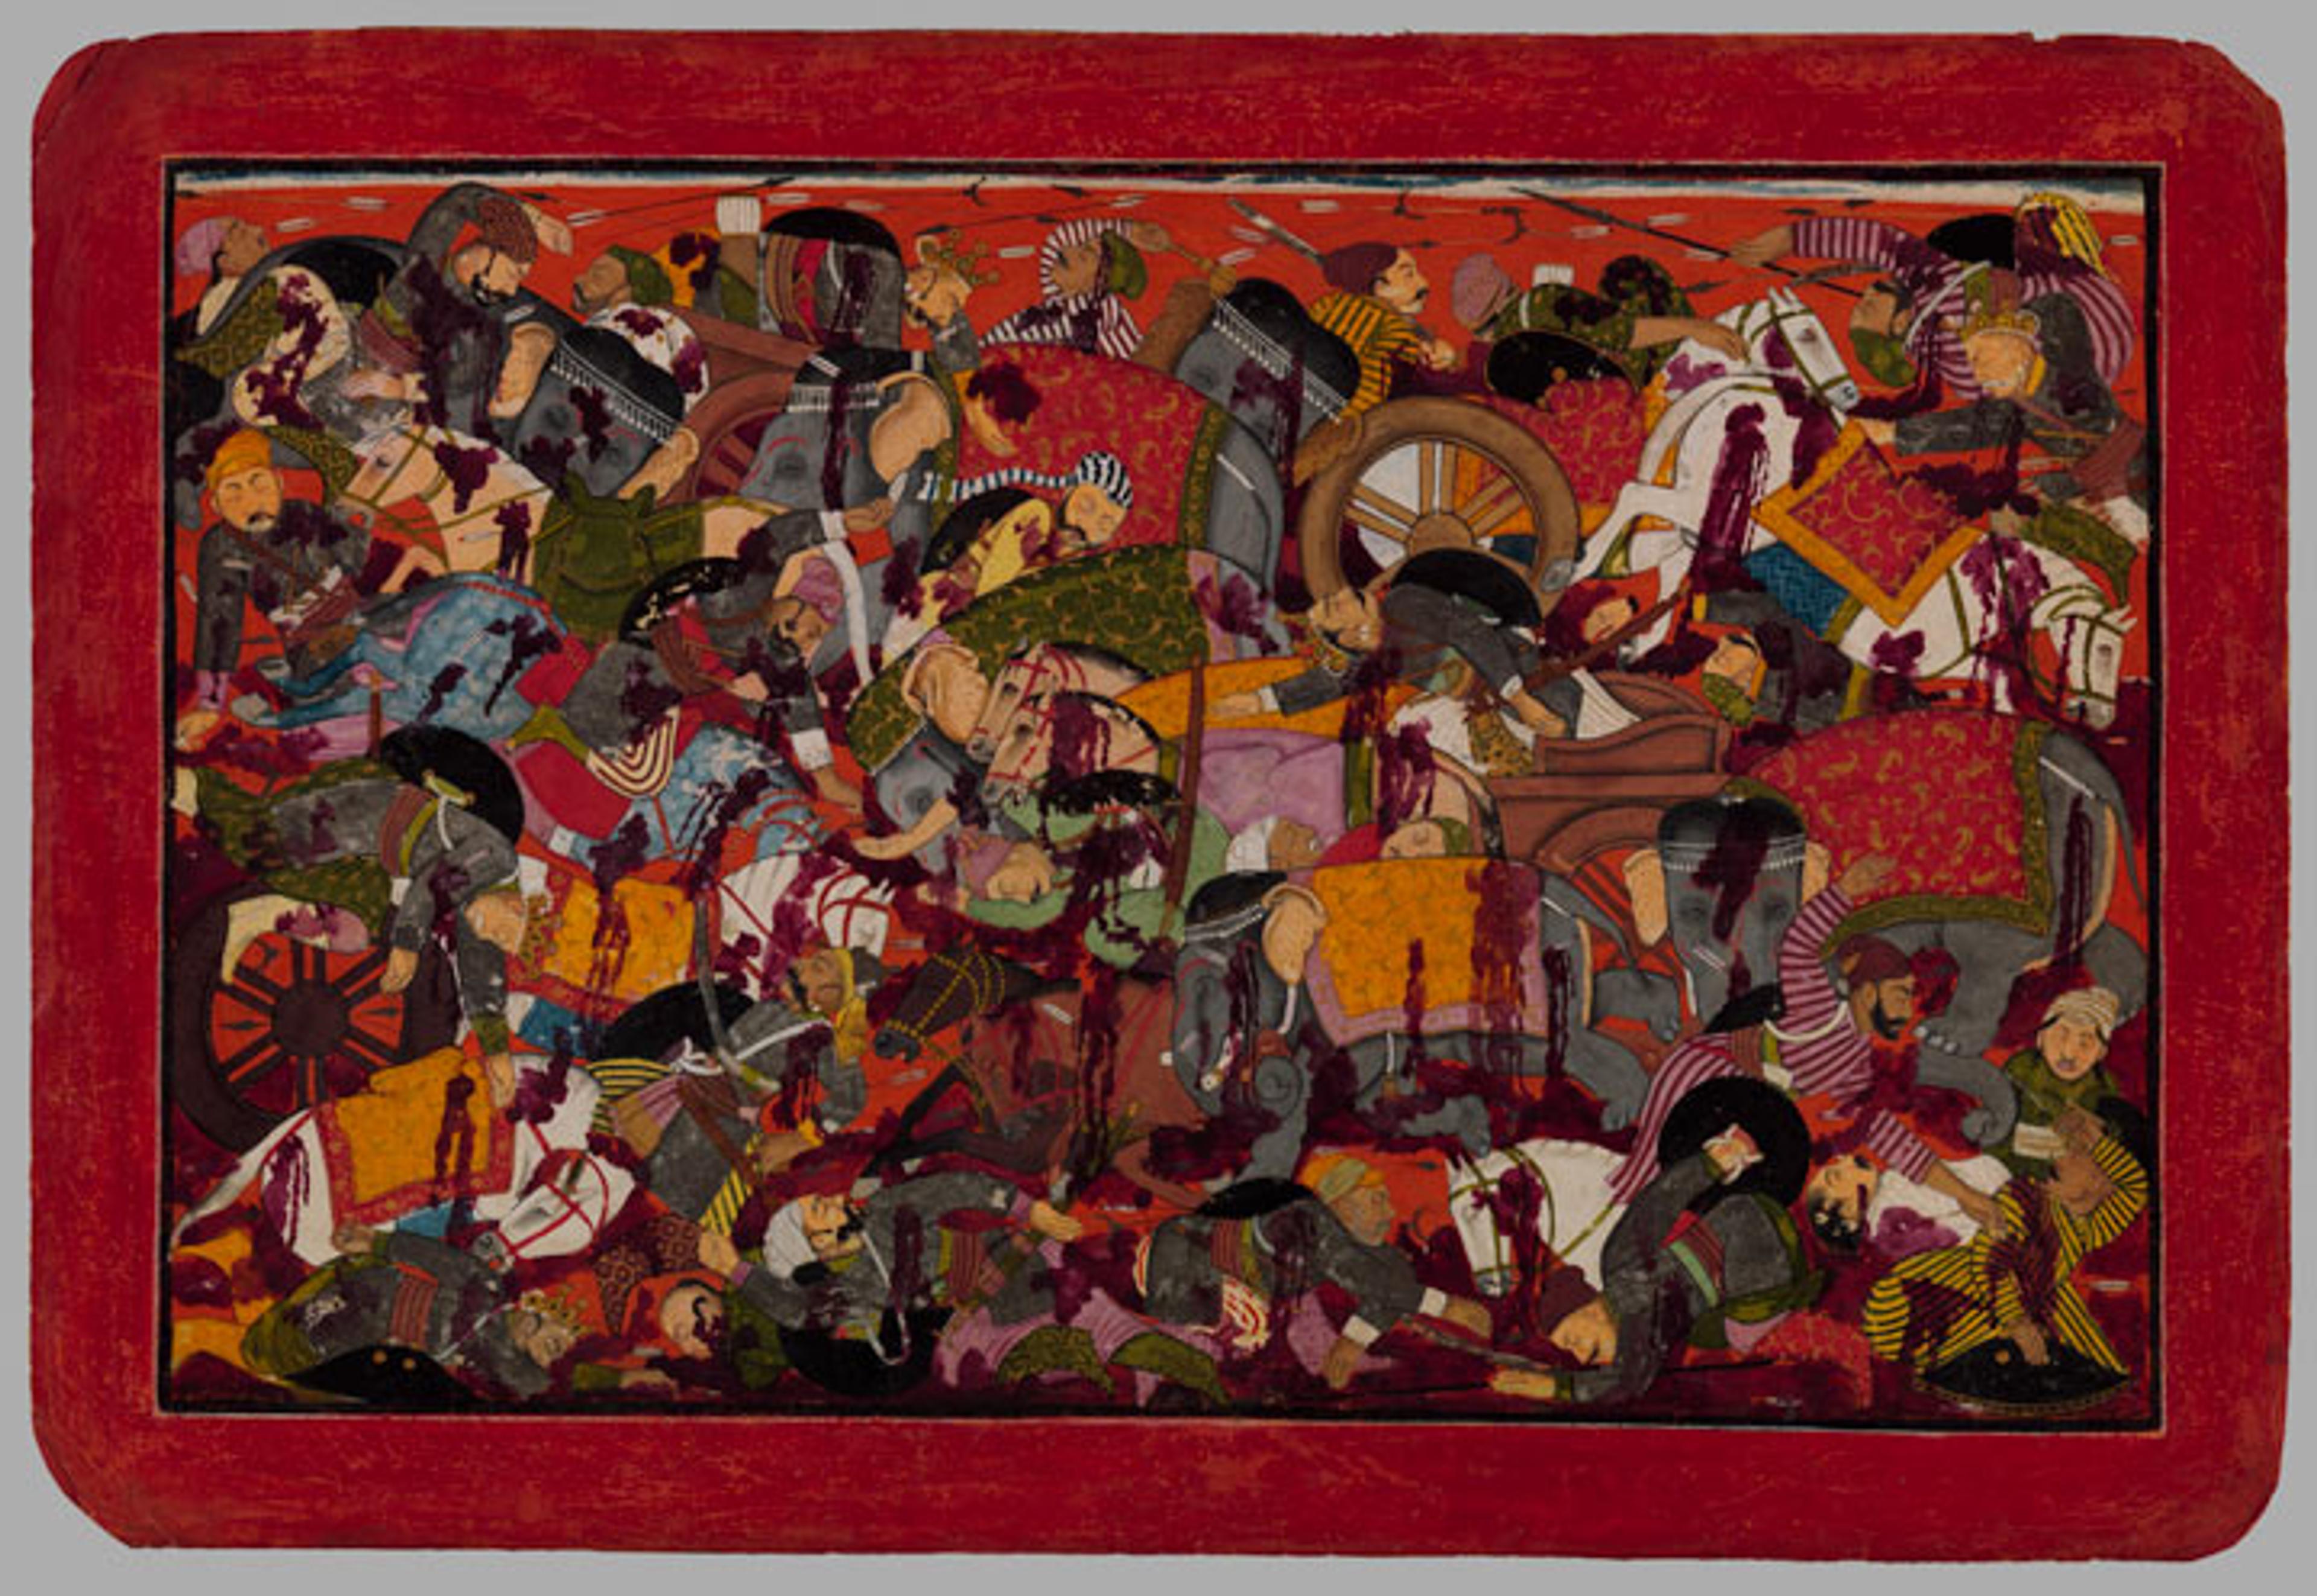 "The Nightmare Dream of a King: The Fearsome Aftermath of the Battle of Kurukshetra," Folio from the unfinished "Small Guler" Bhagavata Purana (The Ancient Story of God), ca. 1740